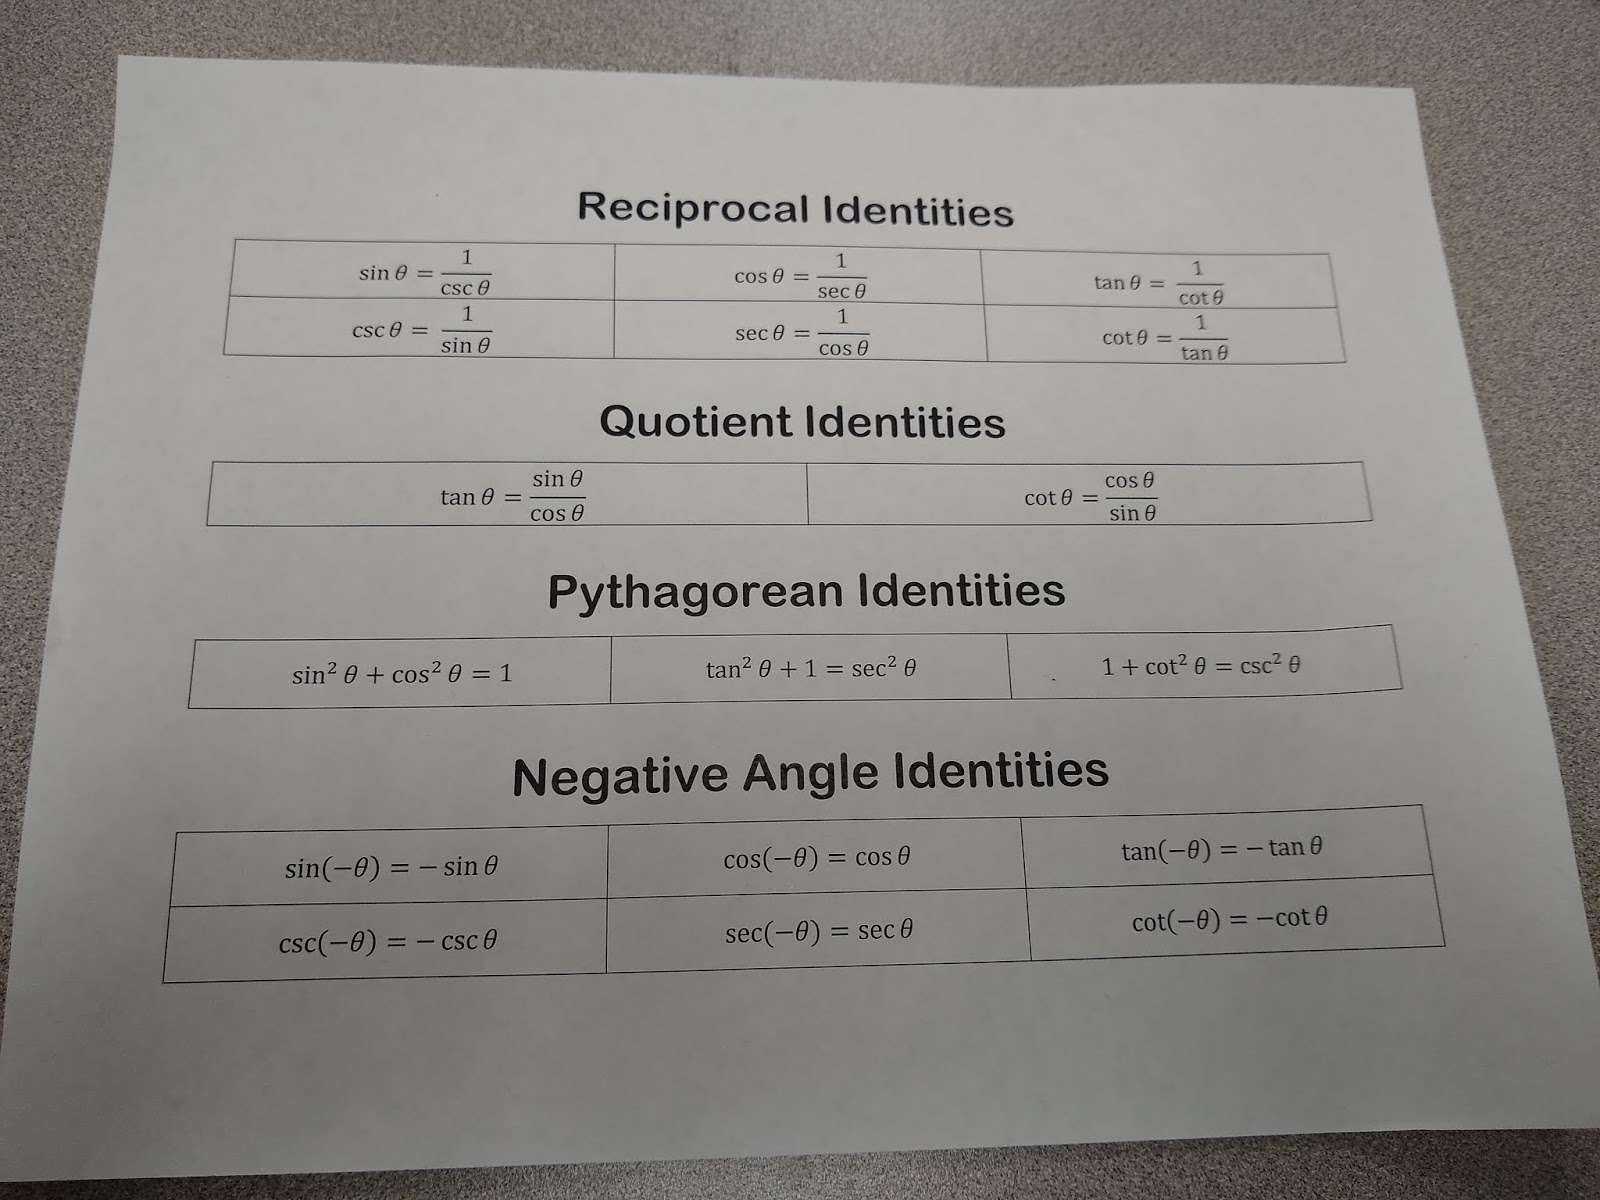 trig identities challenge activity for trigonometry or pre-calculus math classes